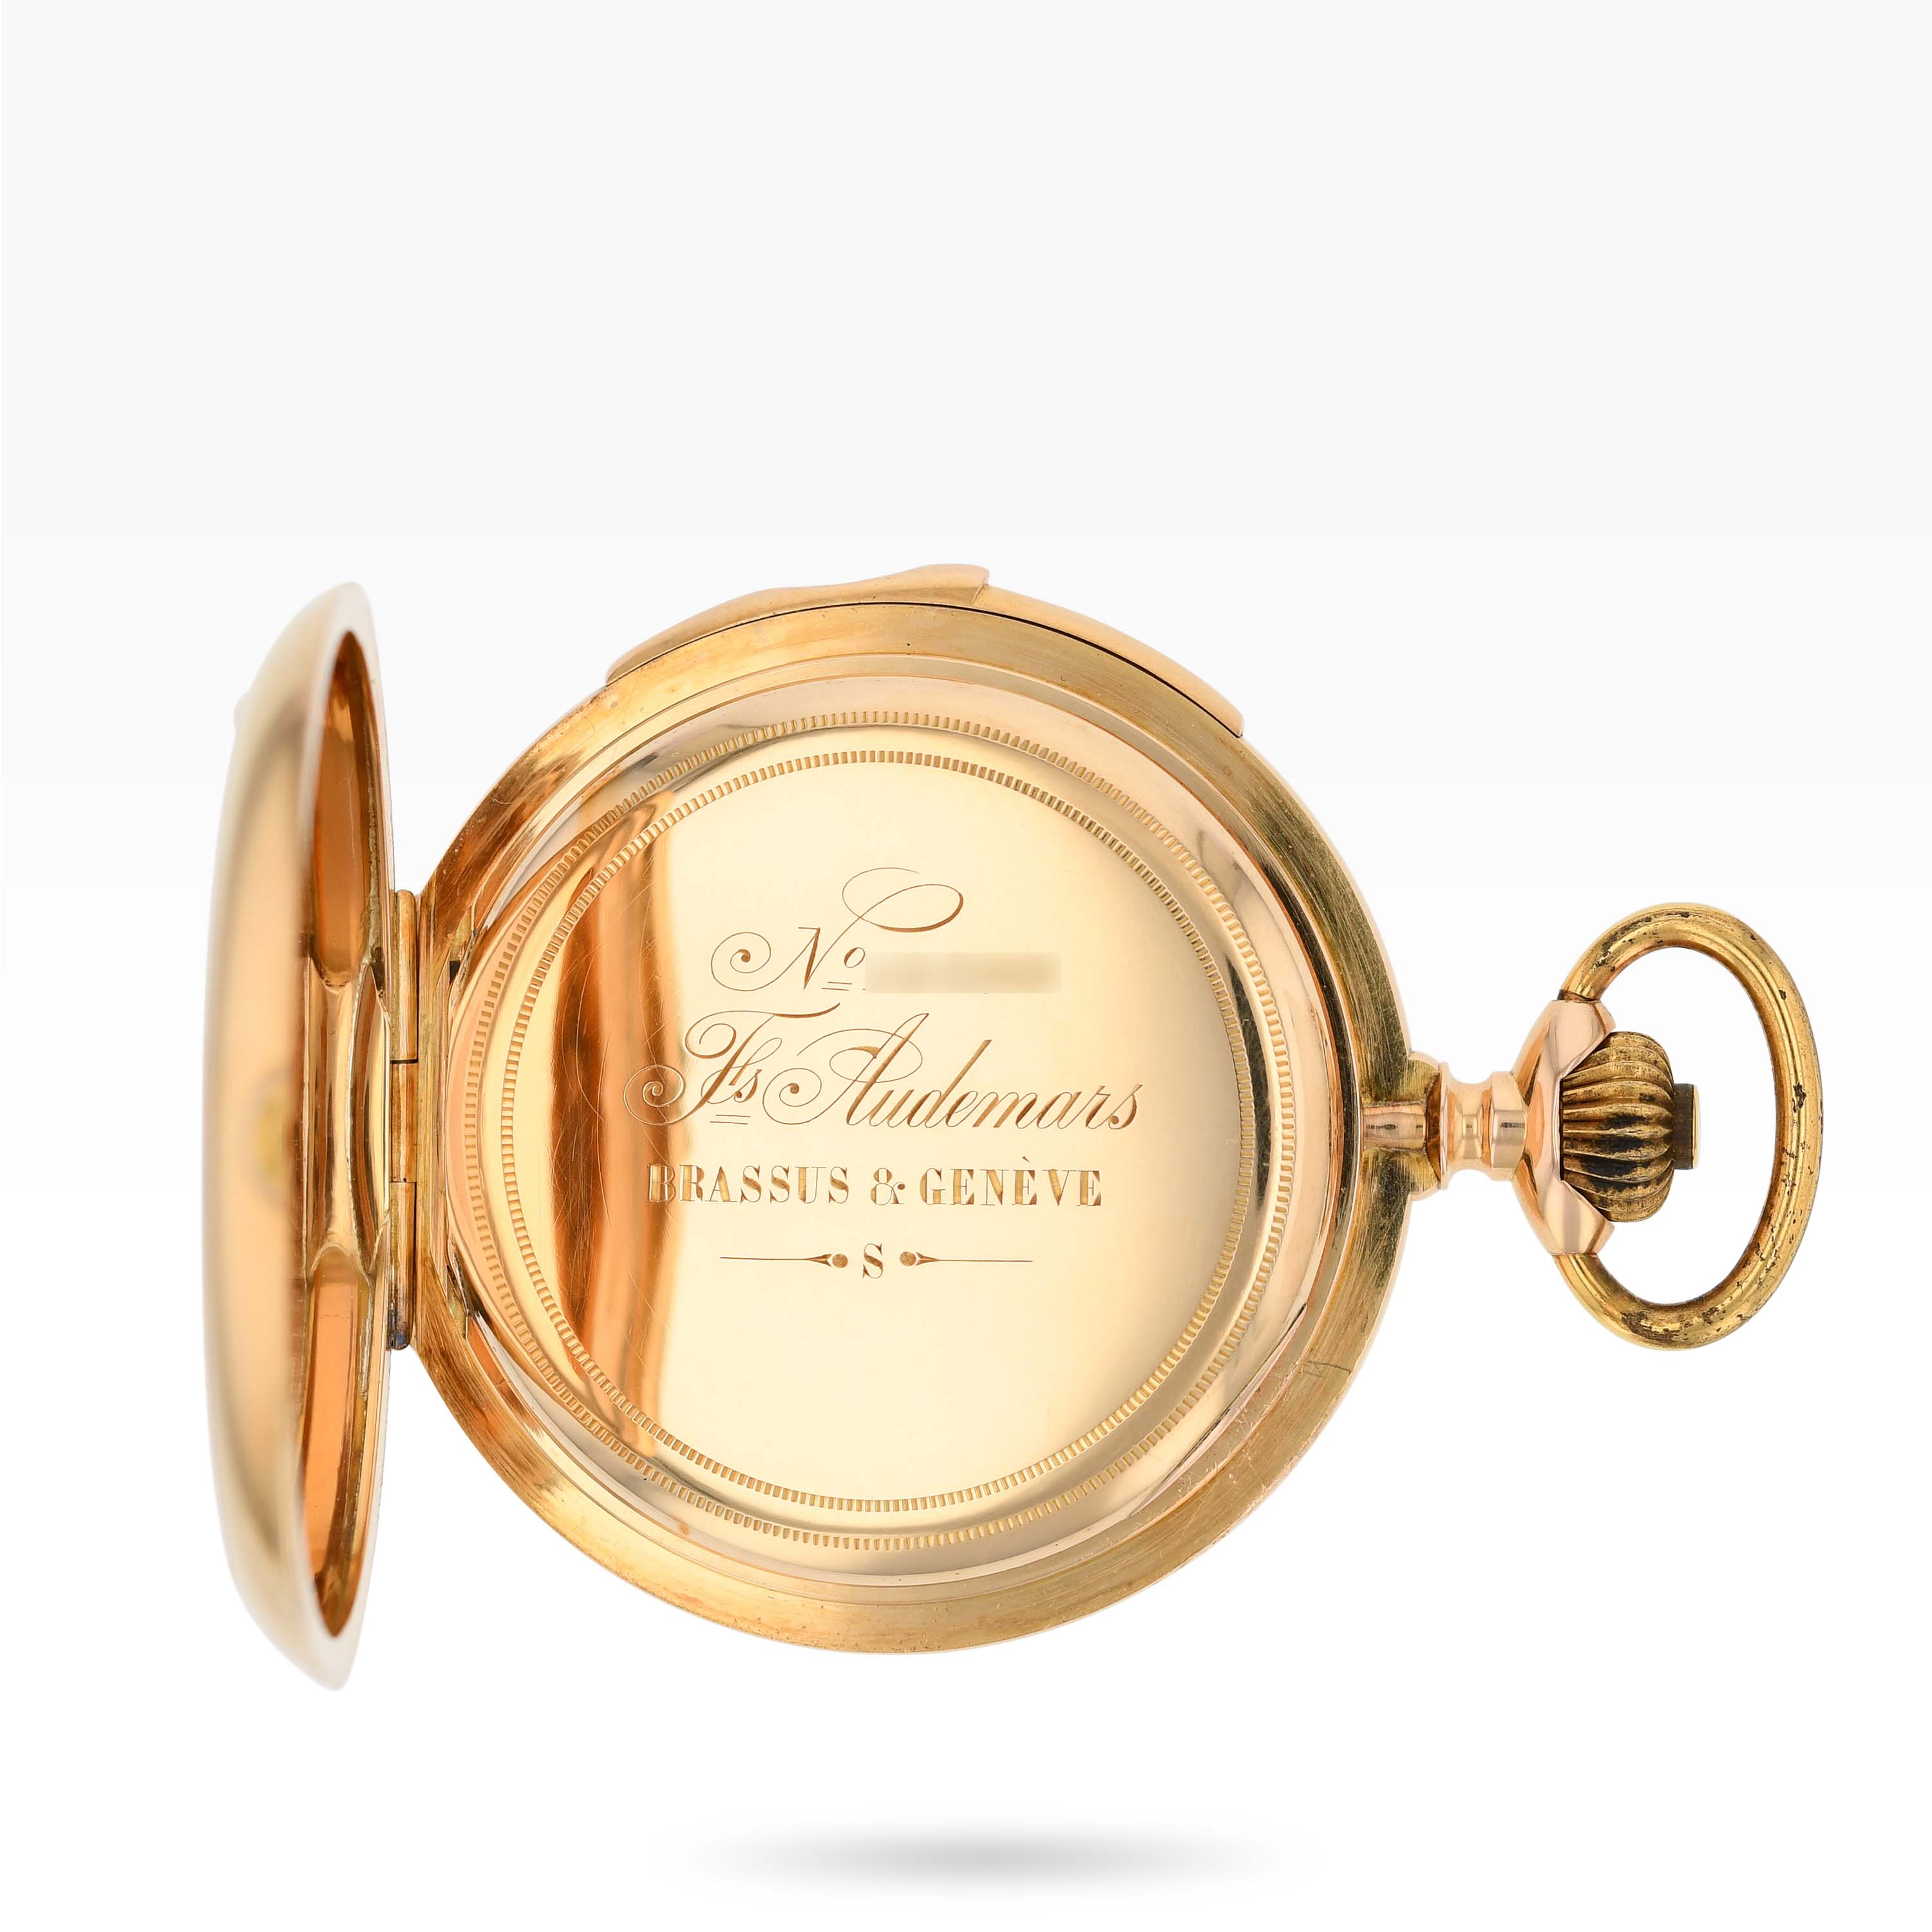 1278PW1 Frères Audemars 18k yellow gold hunting case minute repeater pocket watch img-main3